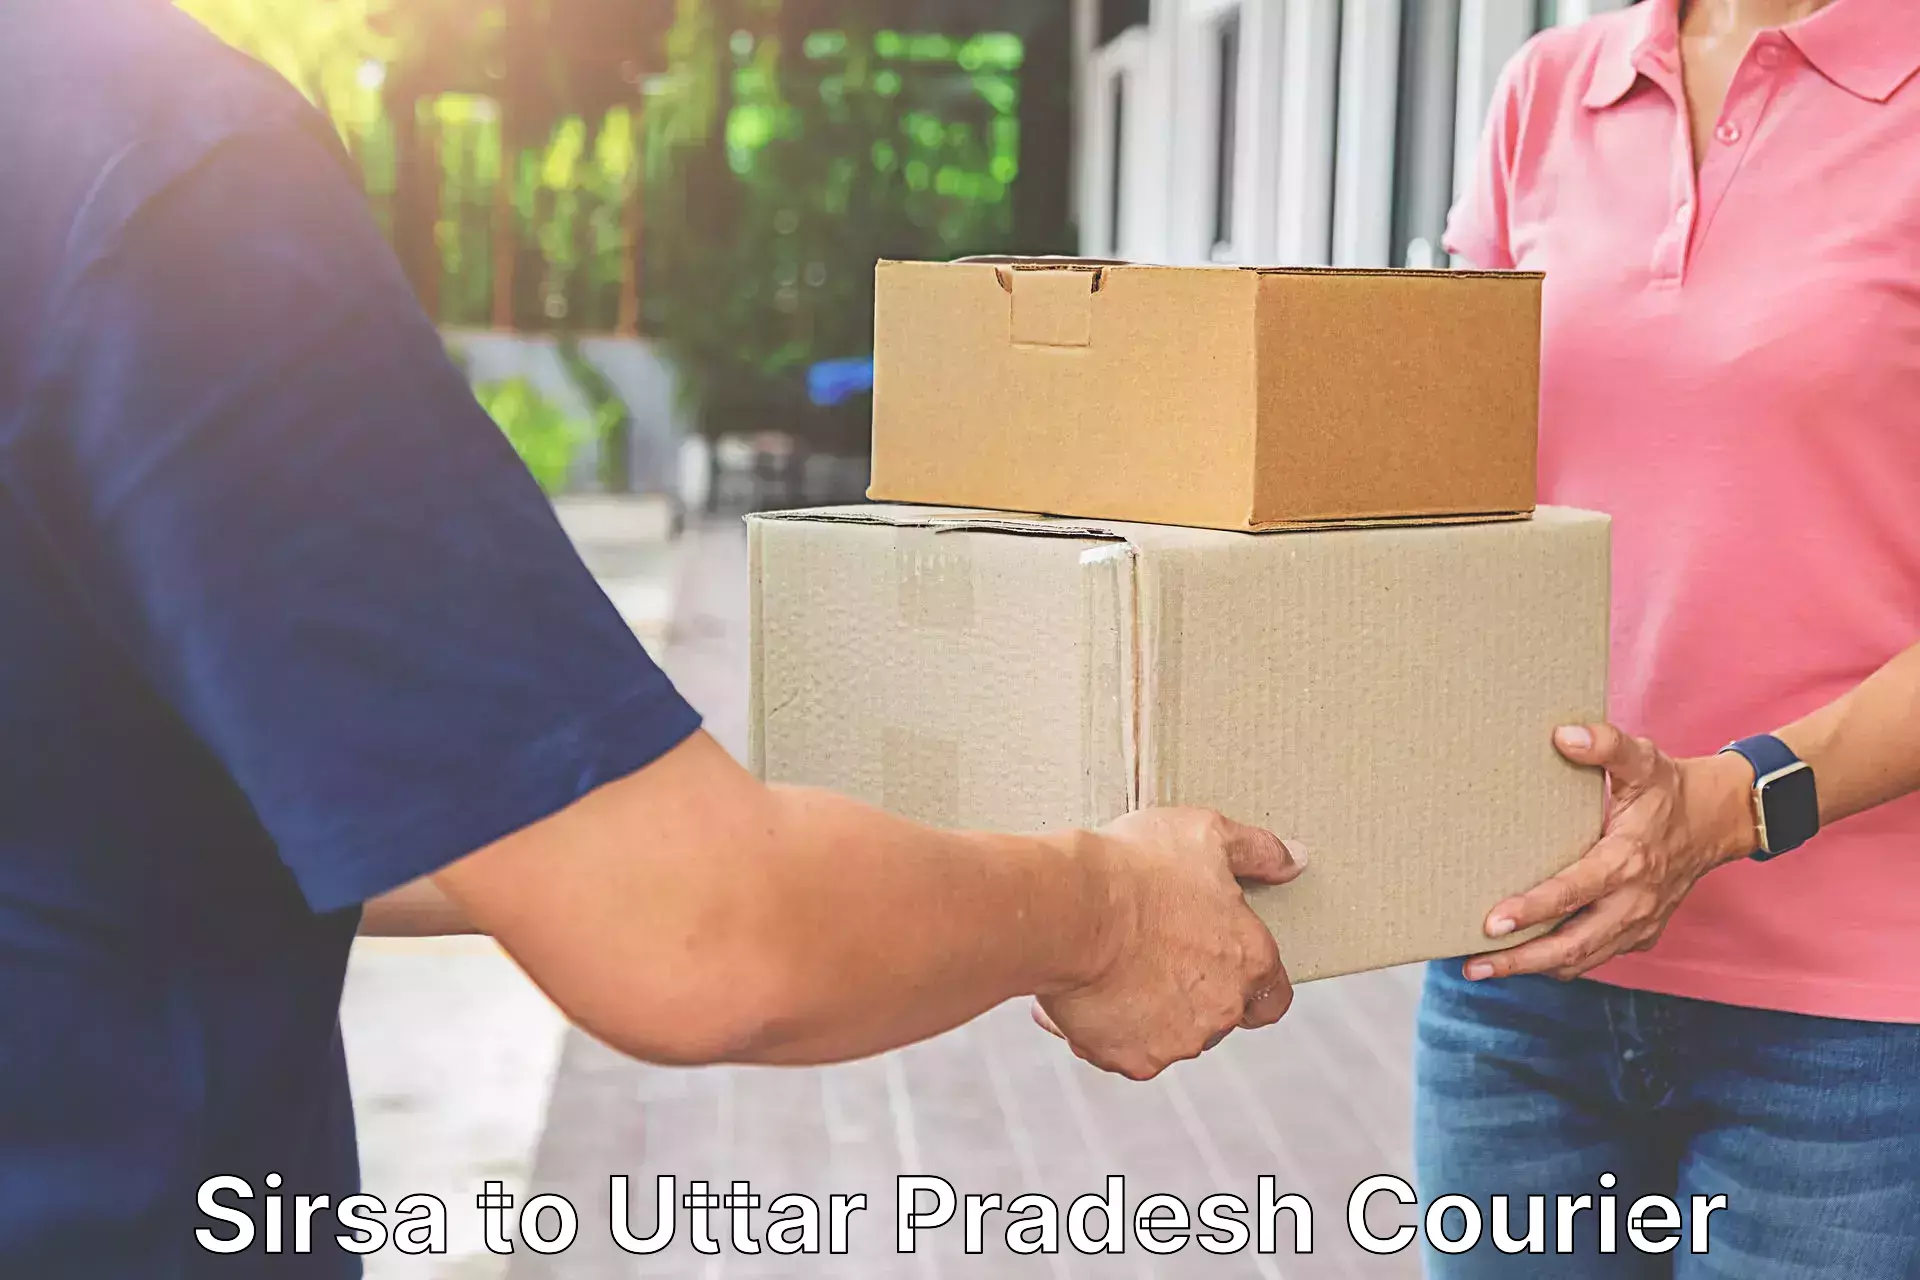 Reliable courier service Sirsa to Fatehabad Agra